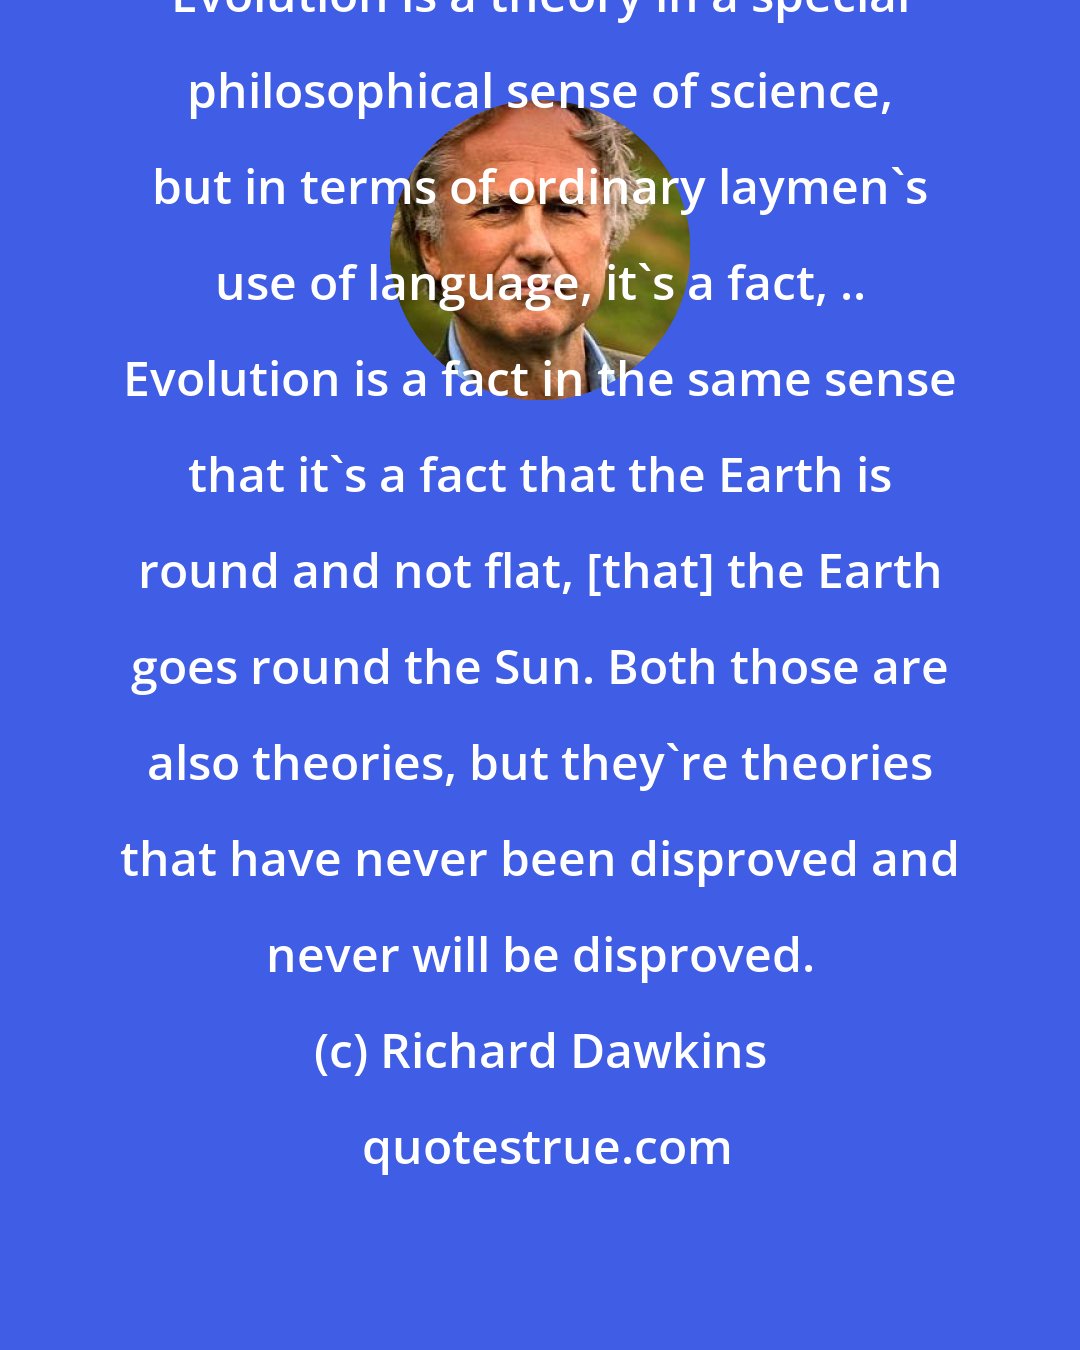 Richard Dawkins: Evolution is a theory in a special philosophical sense of science, but in terms of ordinary laymen's use of language, it's a fact, .. Evolution is a fact in the same sense that it's a fact that the Earth is round and not flat, [that] the Earth goes round the Sun. Both those are also theories, but they're theories that have never been disproved and never will be disproved.